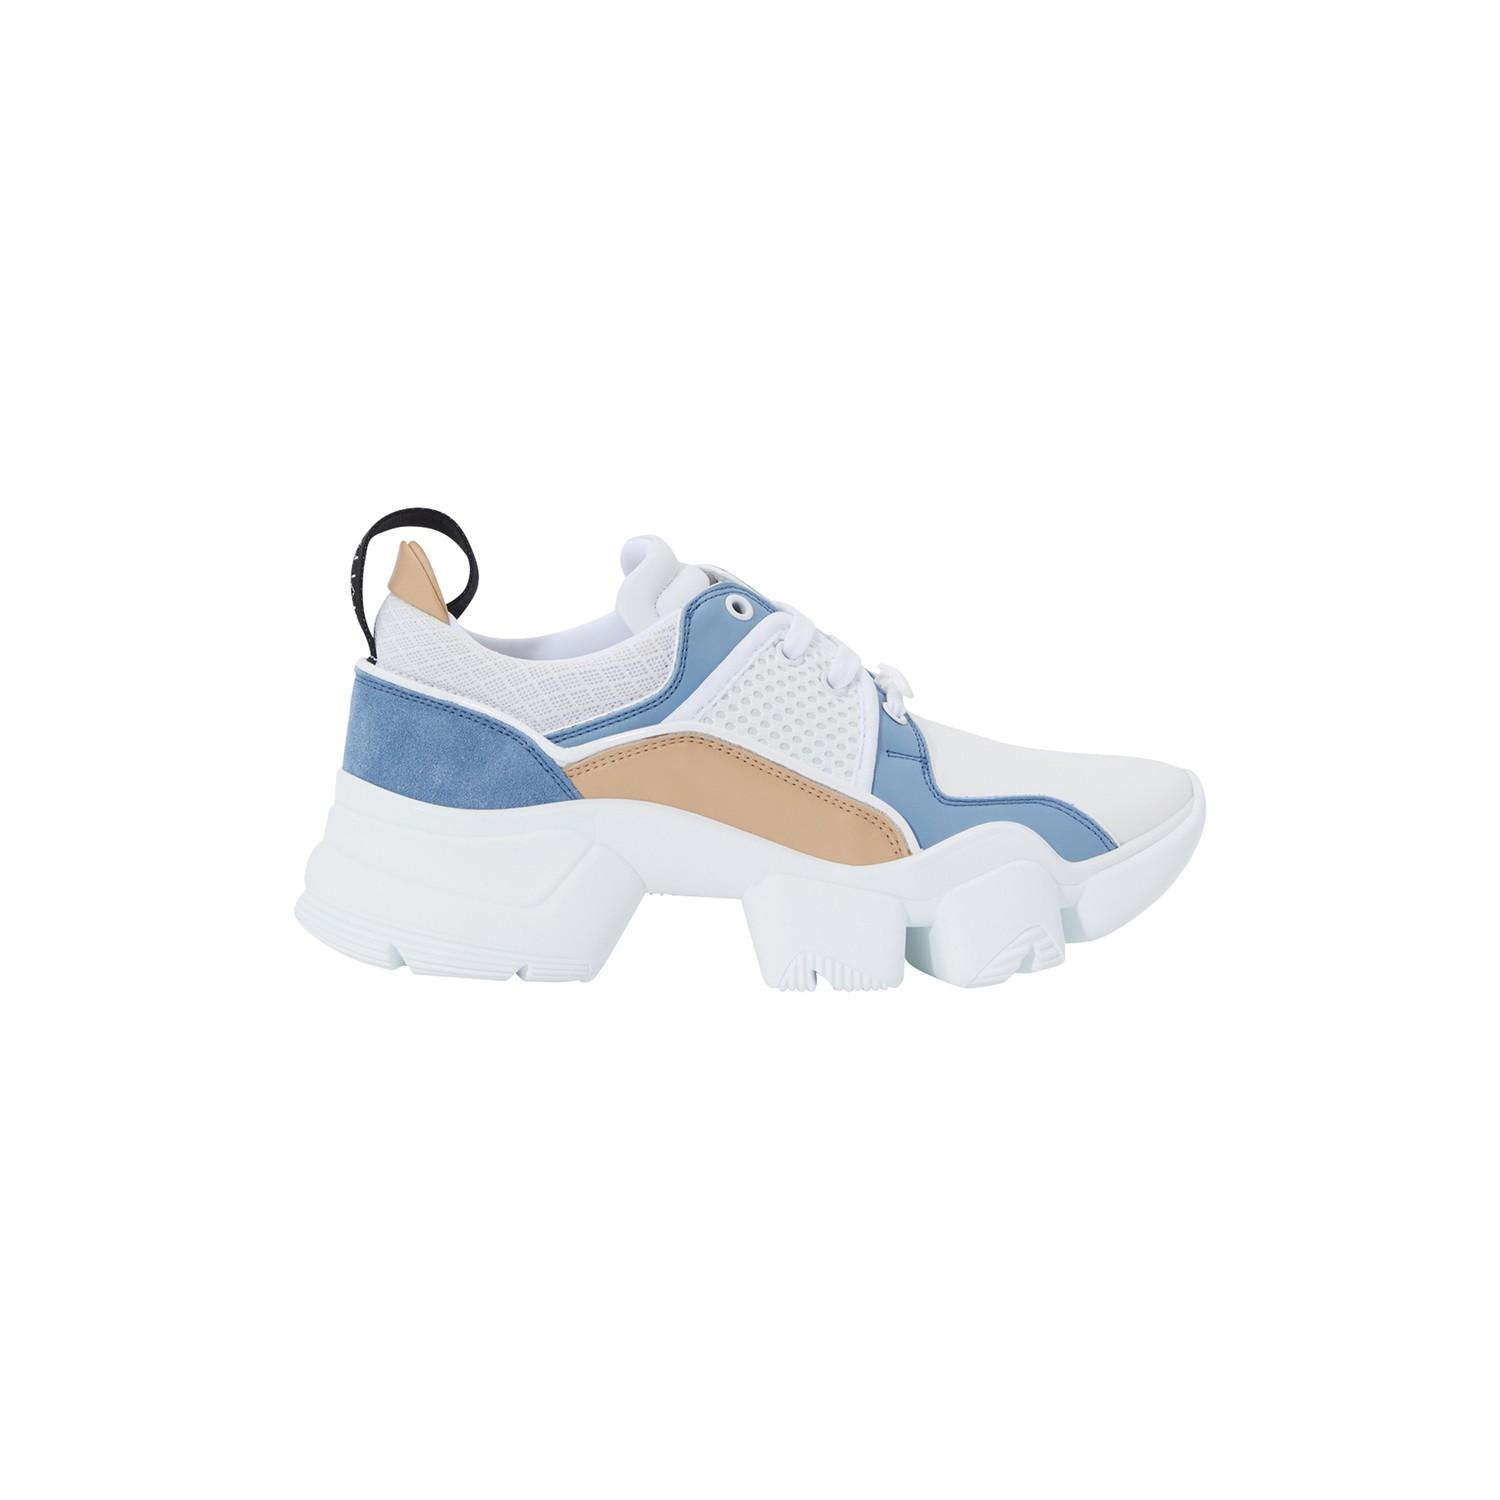 Givenchy Jaw Low-top Sneakers in Blue - Lyst